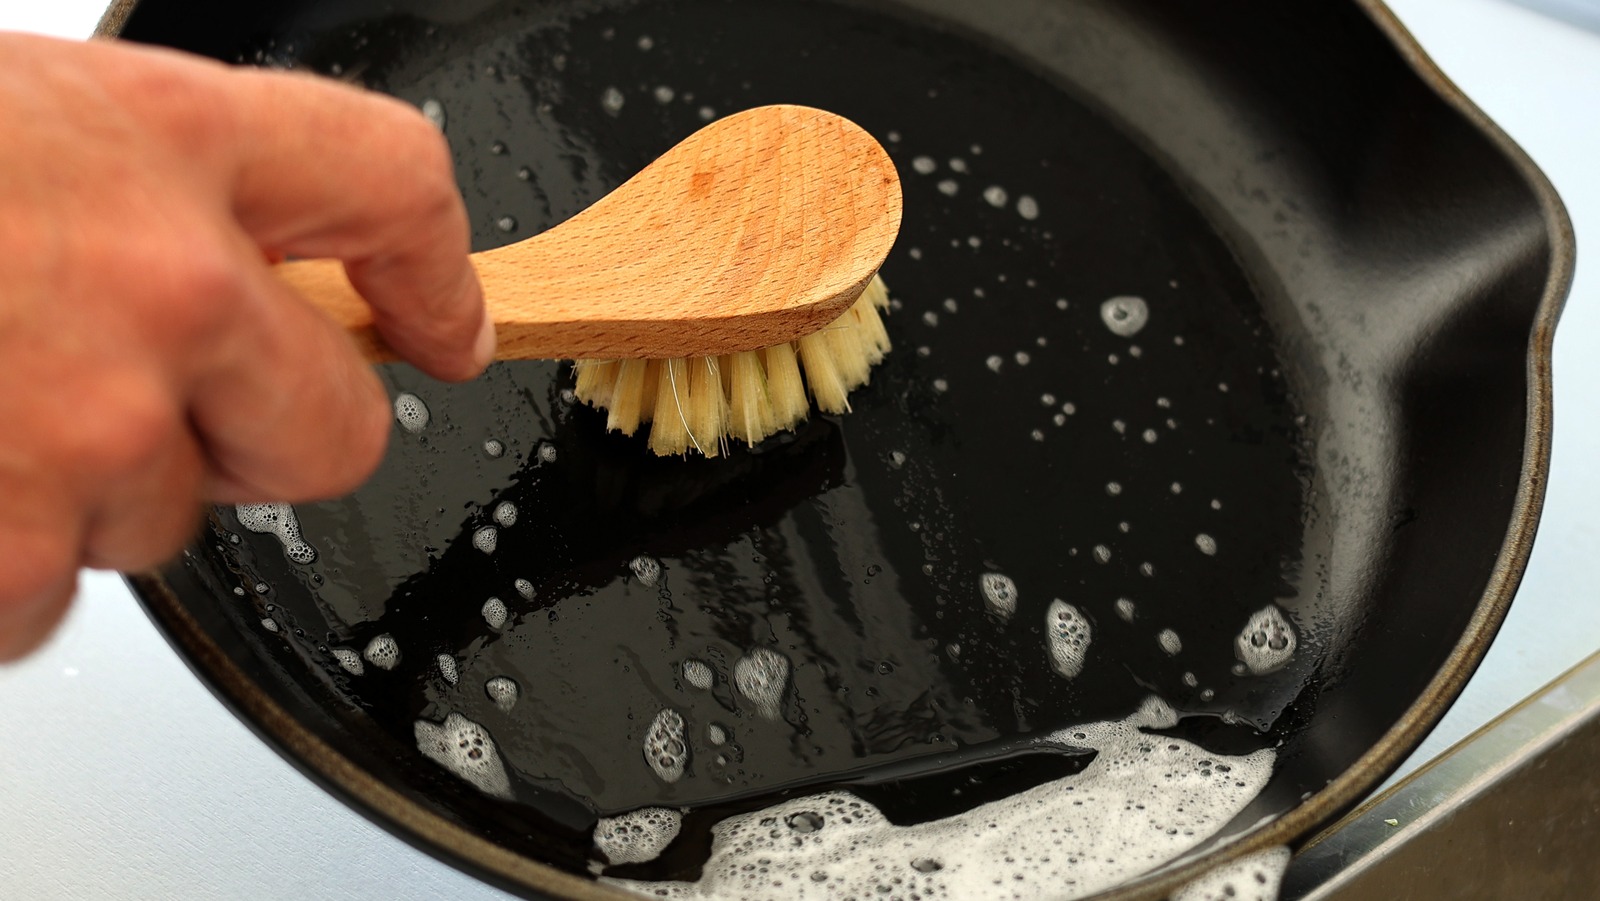 Give Your Dirty Cast Iron Pans a Salted Spud Scrub « Food Hacks